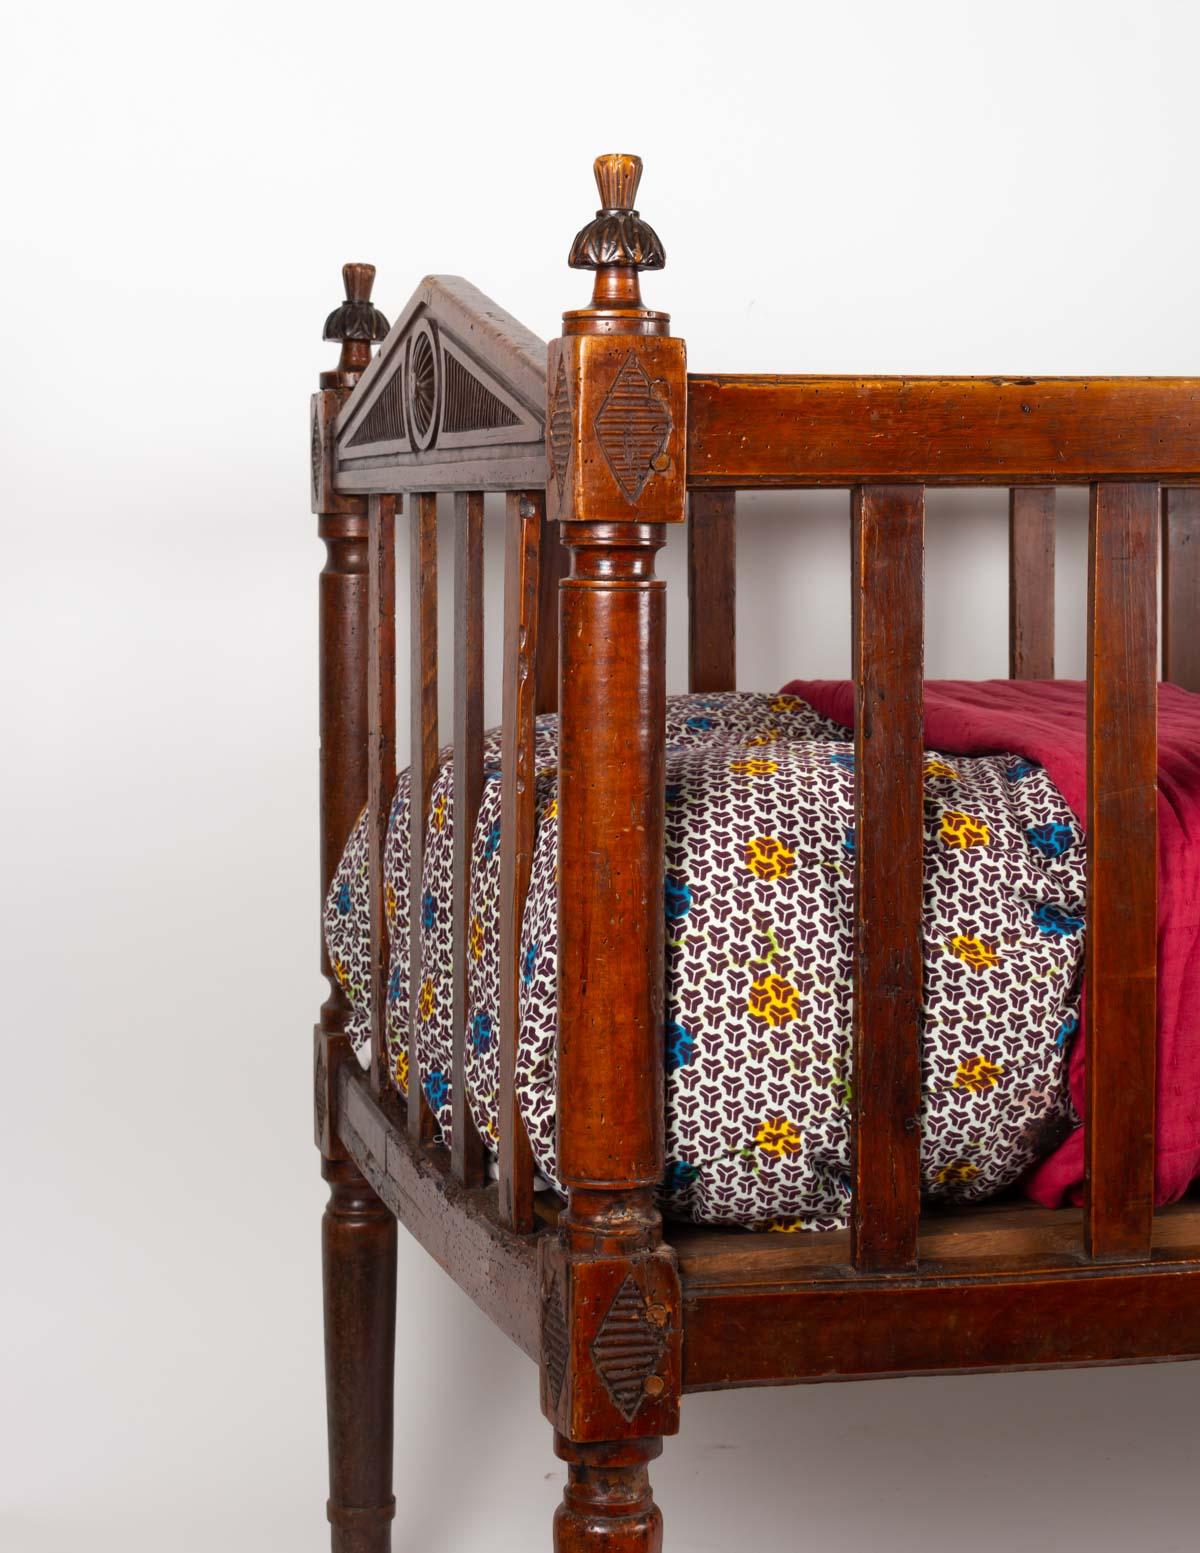 18th century baby bed in walnut with its mattress and zinc interior to install a floral decoration when the baby is growing.
Measures: H 84cm, W 113cm, D 58cm.